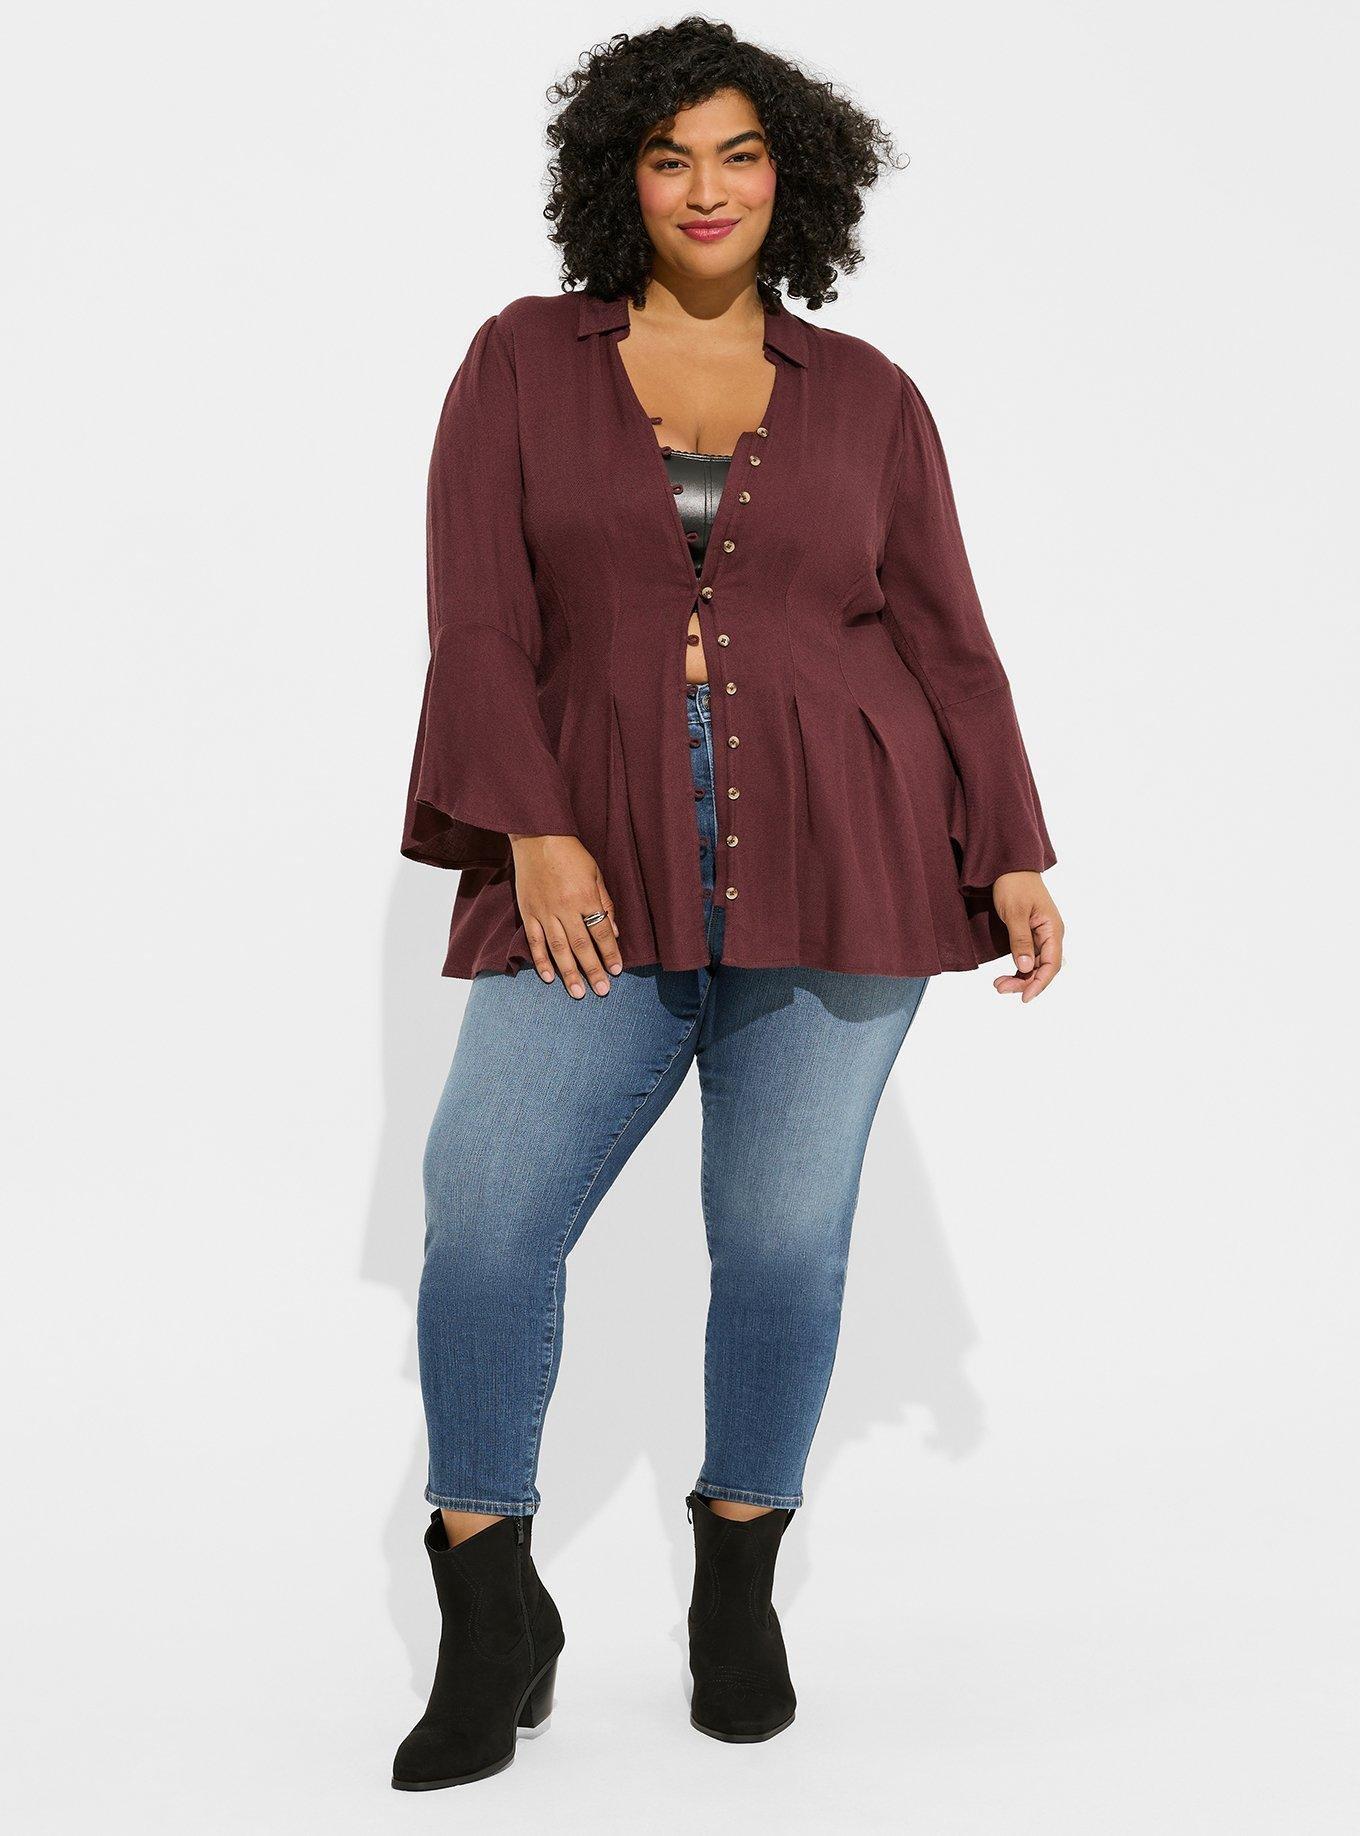 Plus Size - Fit & Flare Brushed Rayon Acrylic Top - Torrid